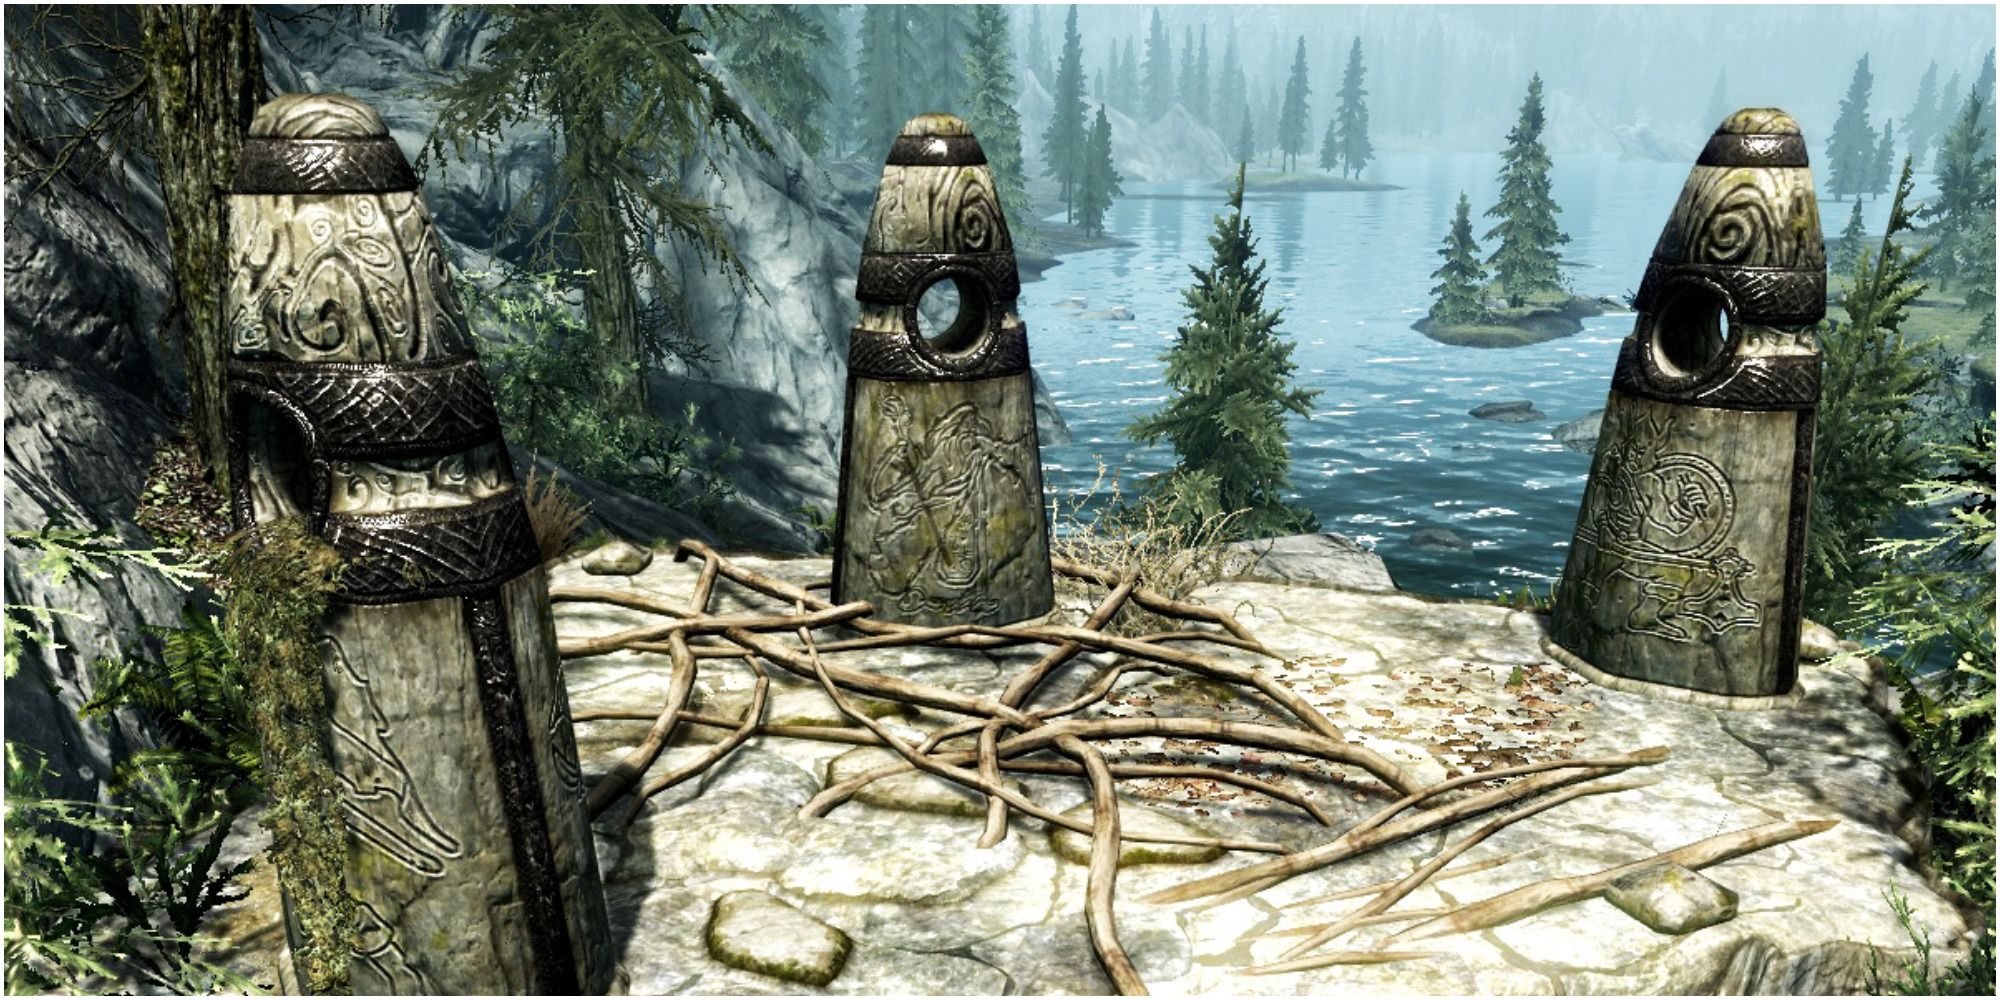 The three Guardian Standing Stones in Skyrim